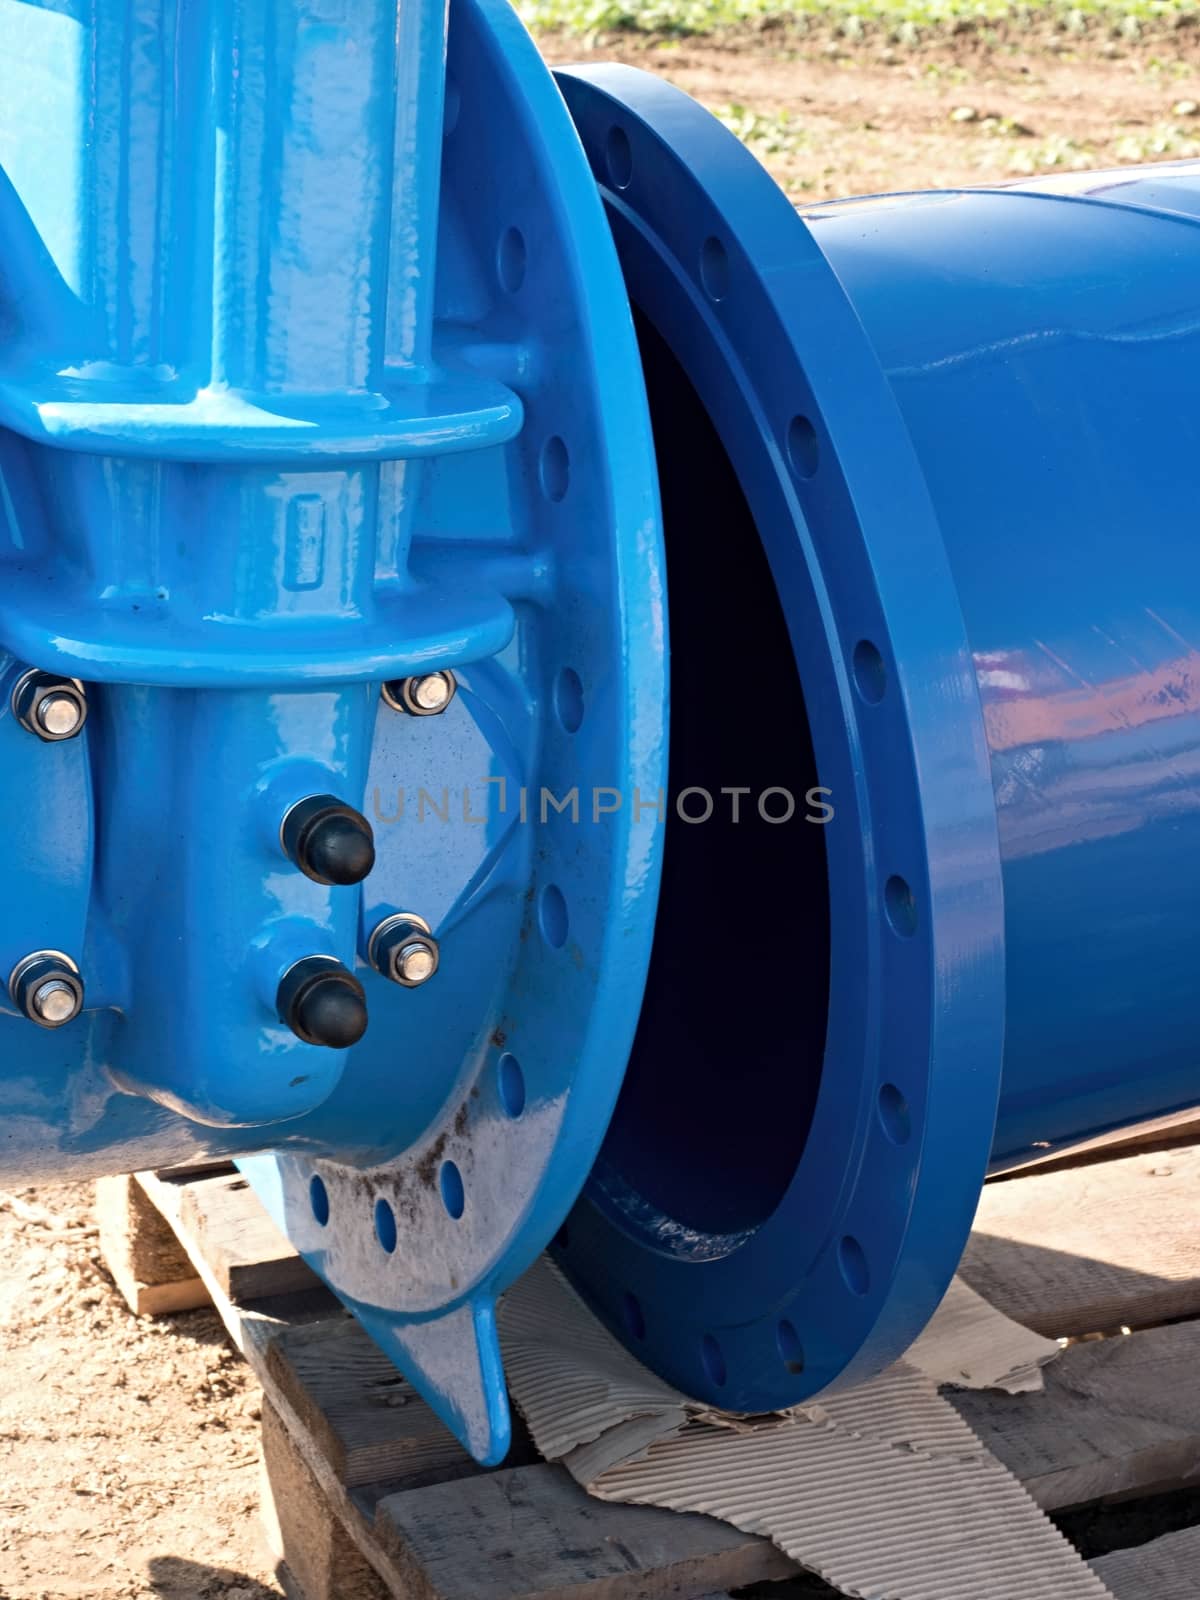 500mm drink water Gate valve joint with screwed pipe fitting by rdonar2